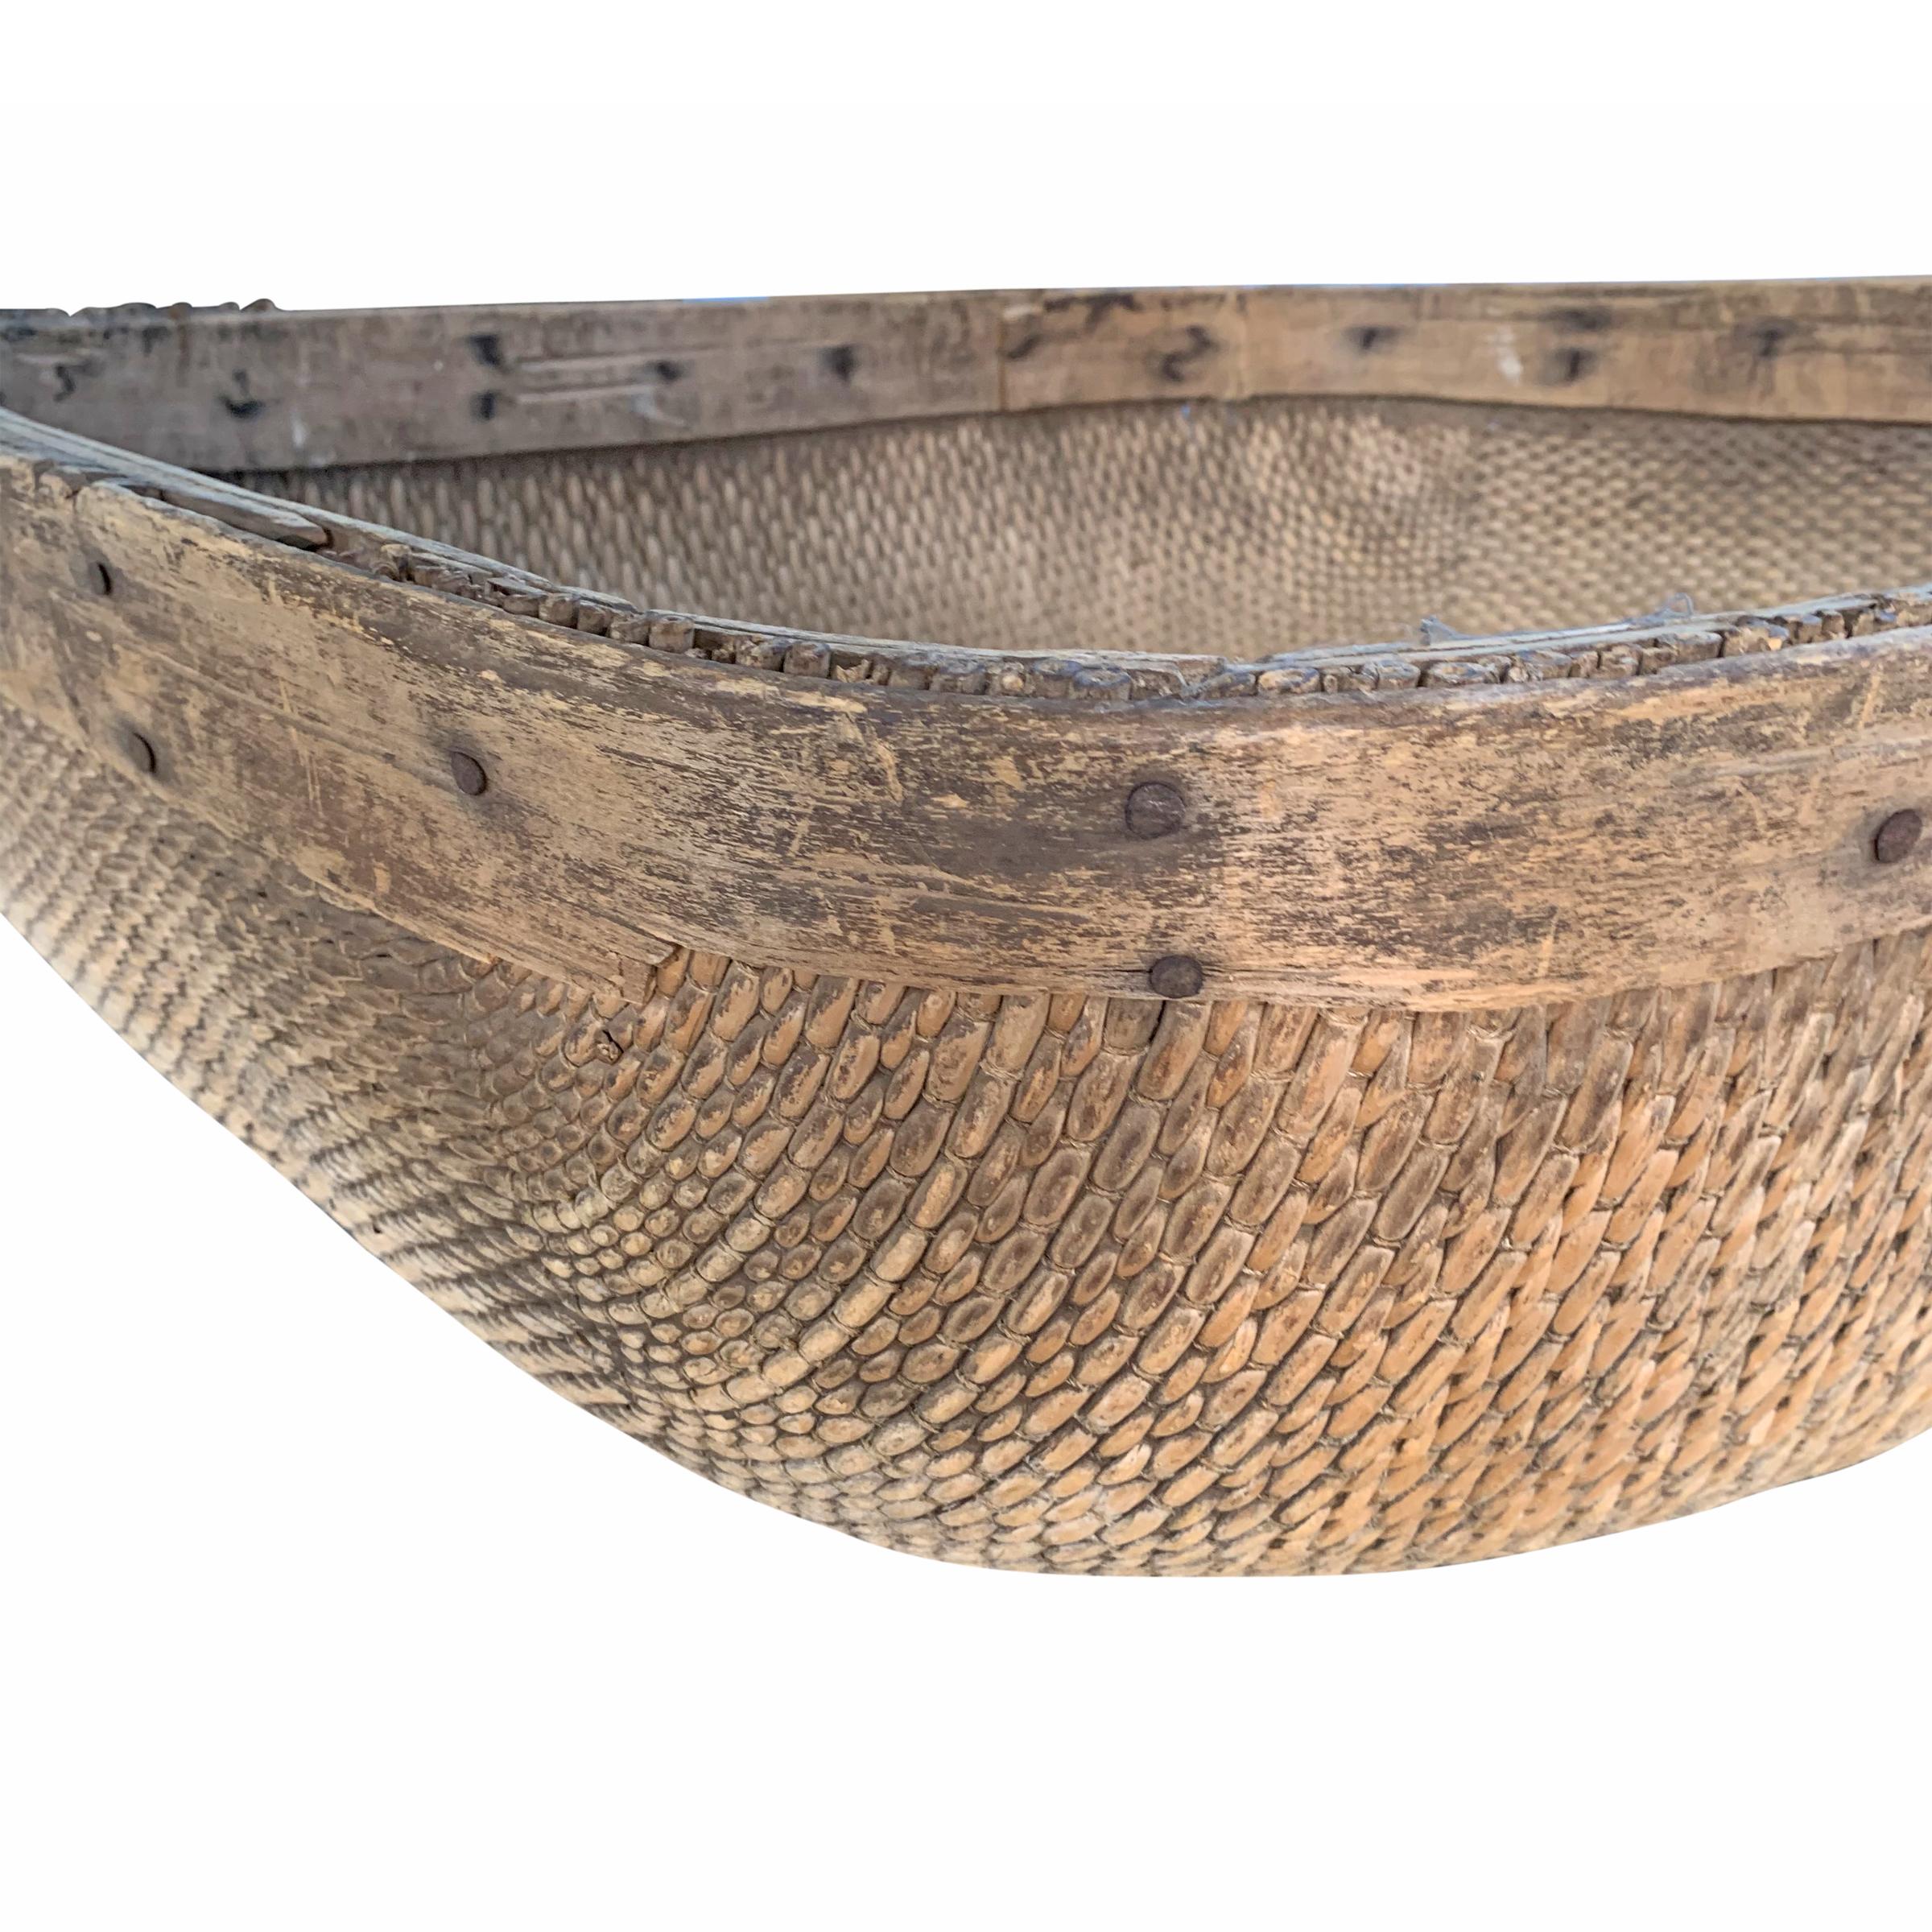 Reed Early 20th Century Chinese Winnowing Basket